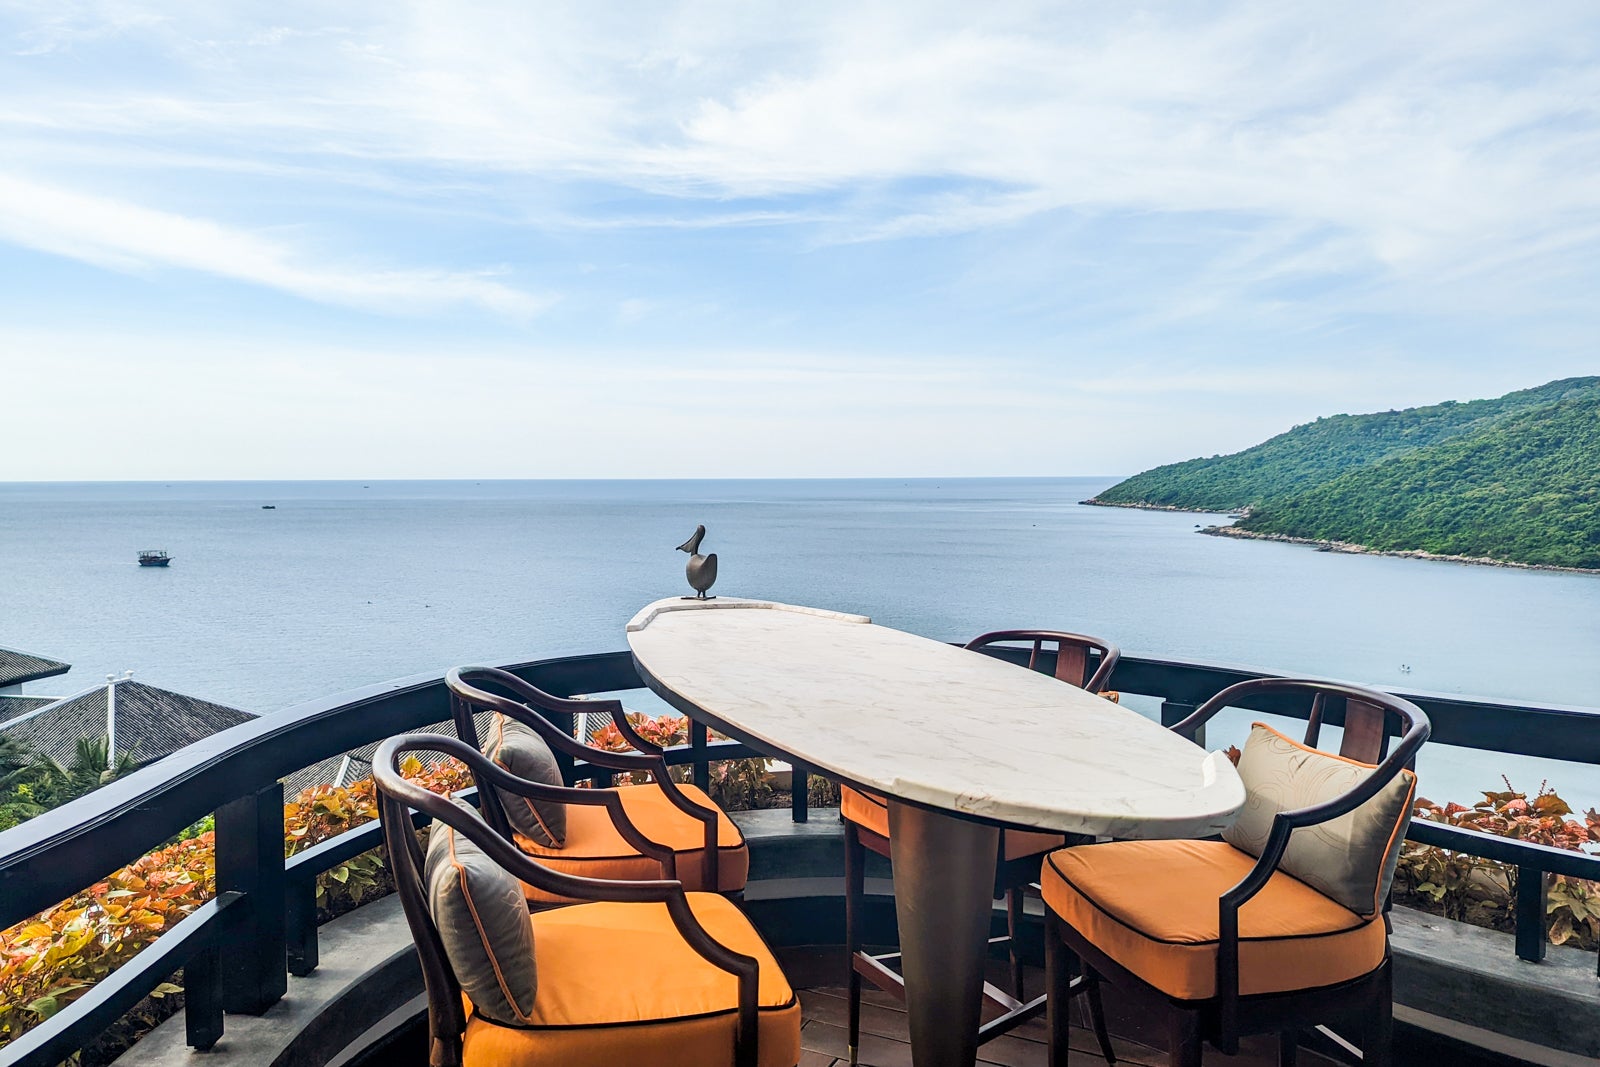 Balcony for InterContinental Danang terrace suite with an ocean view